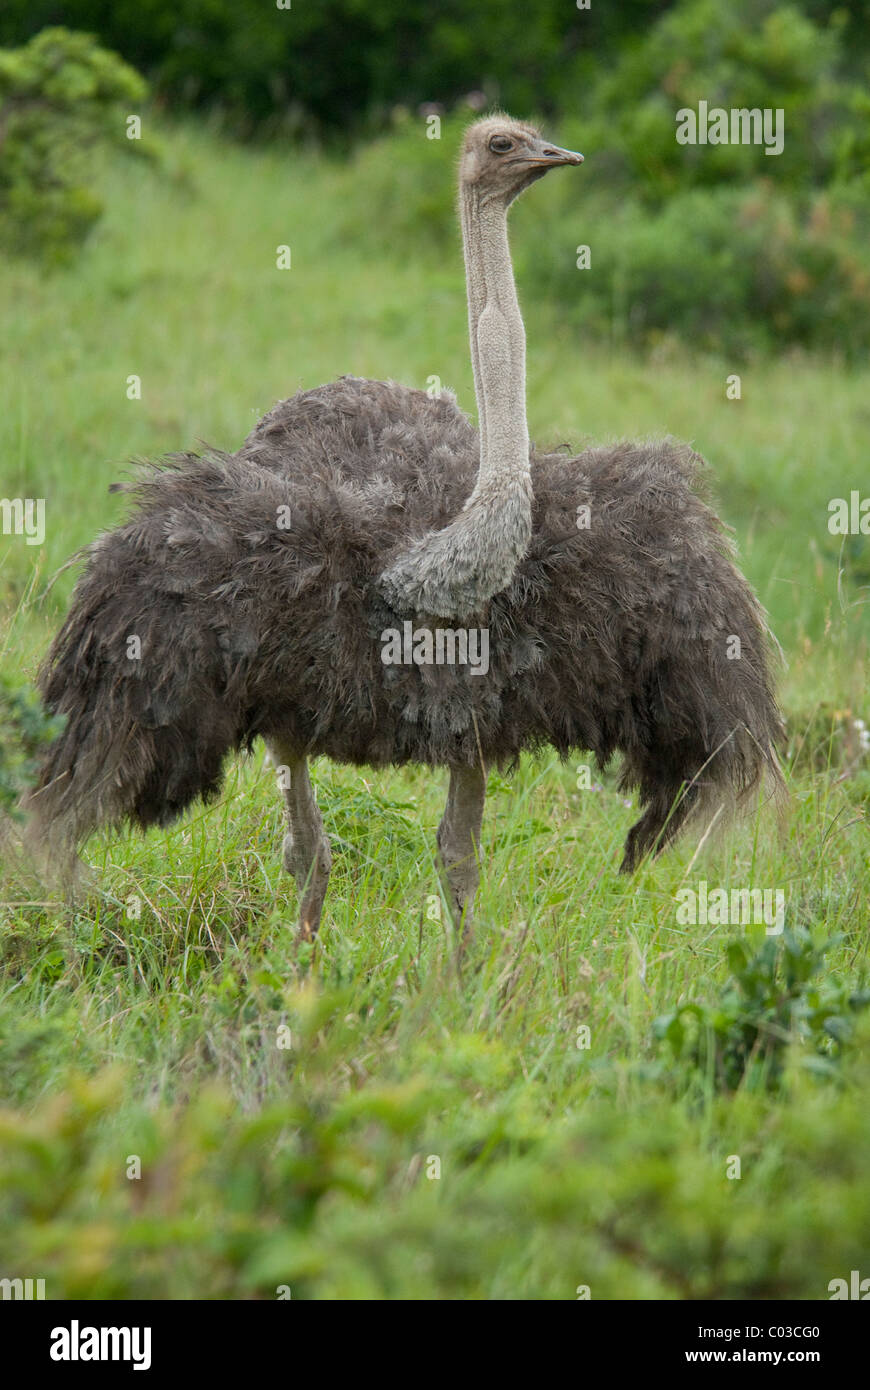 South Africa, Eastern Cape, East London, Inkwenkwezi Private Game Reserve. Female ostrich. Stock Photo